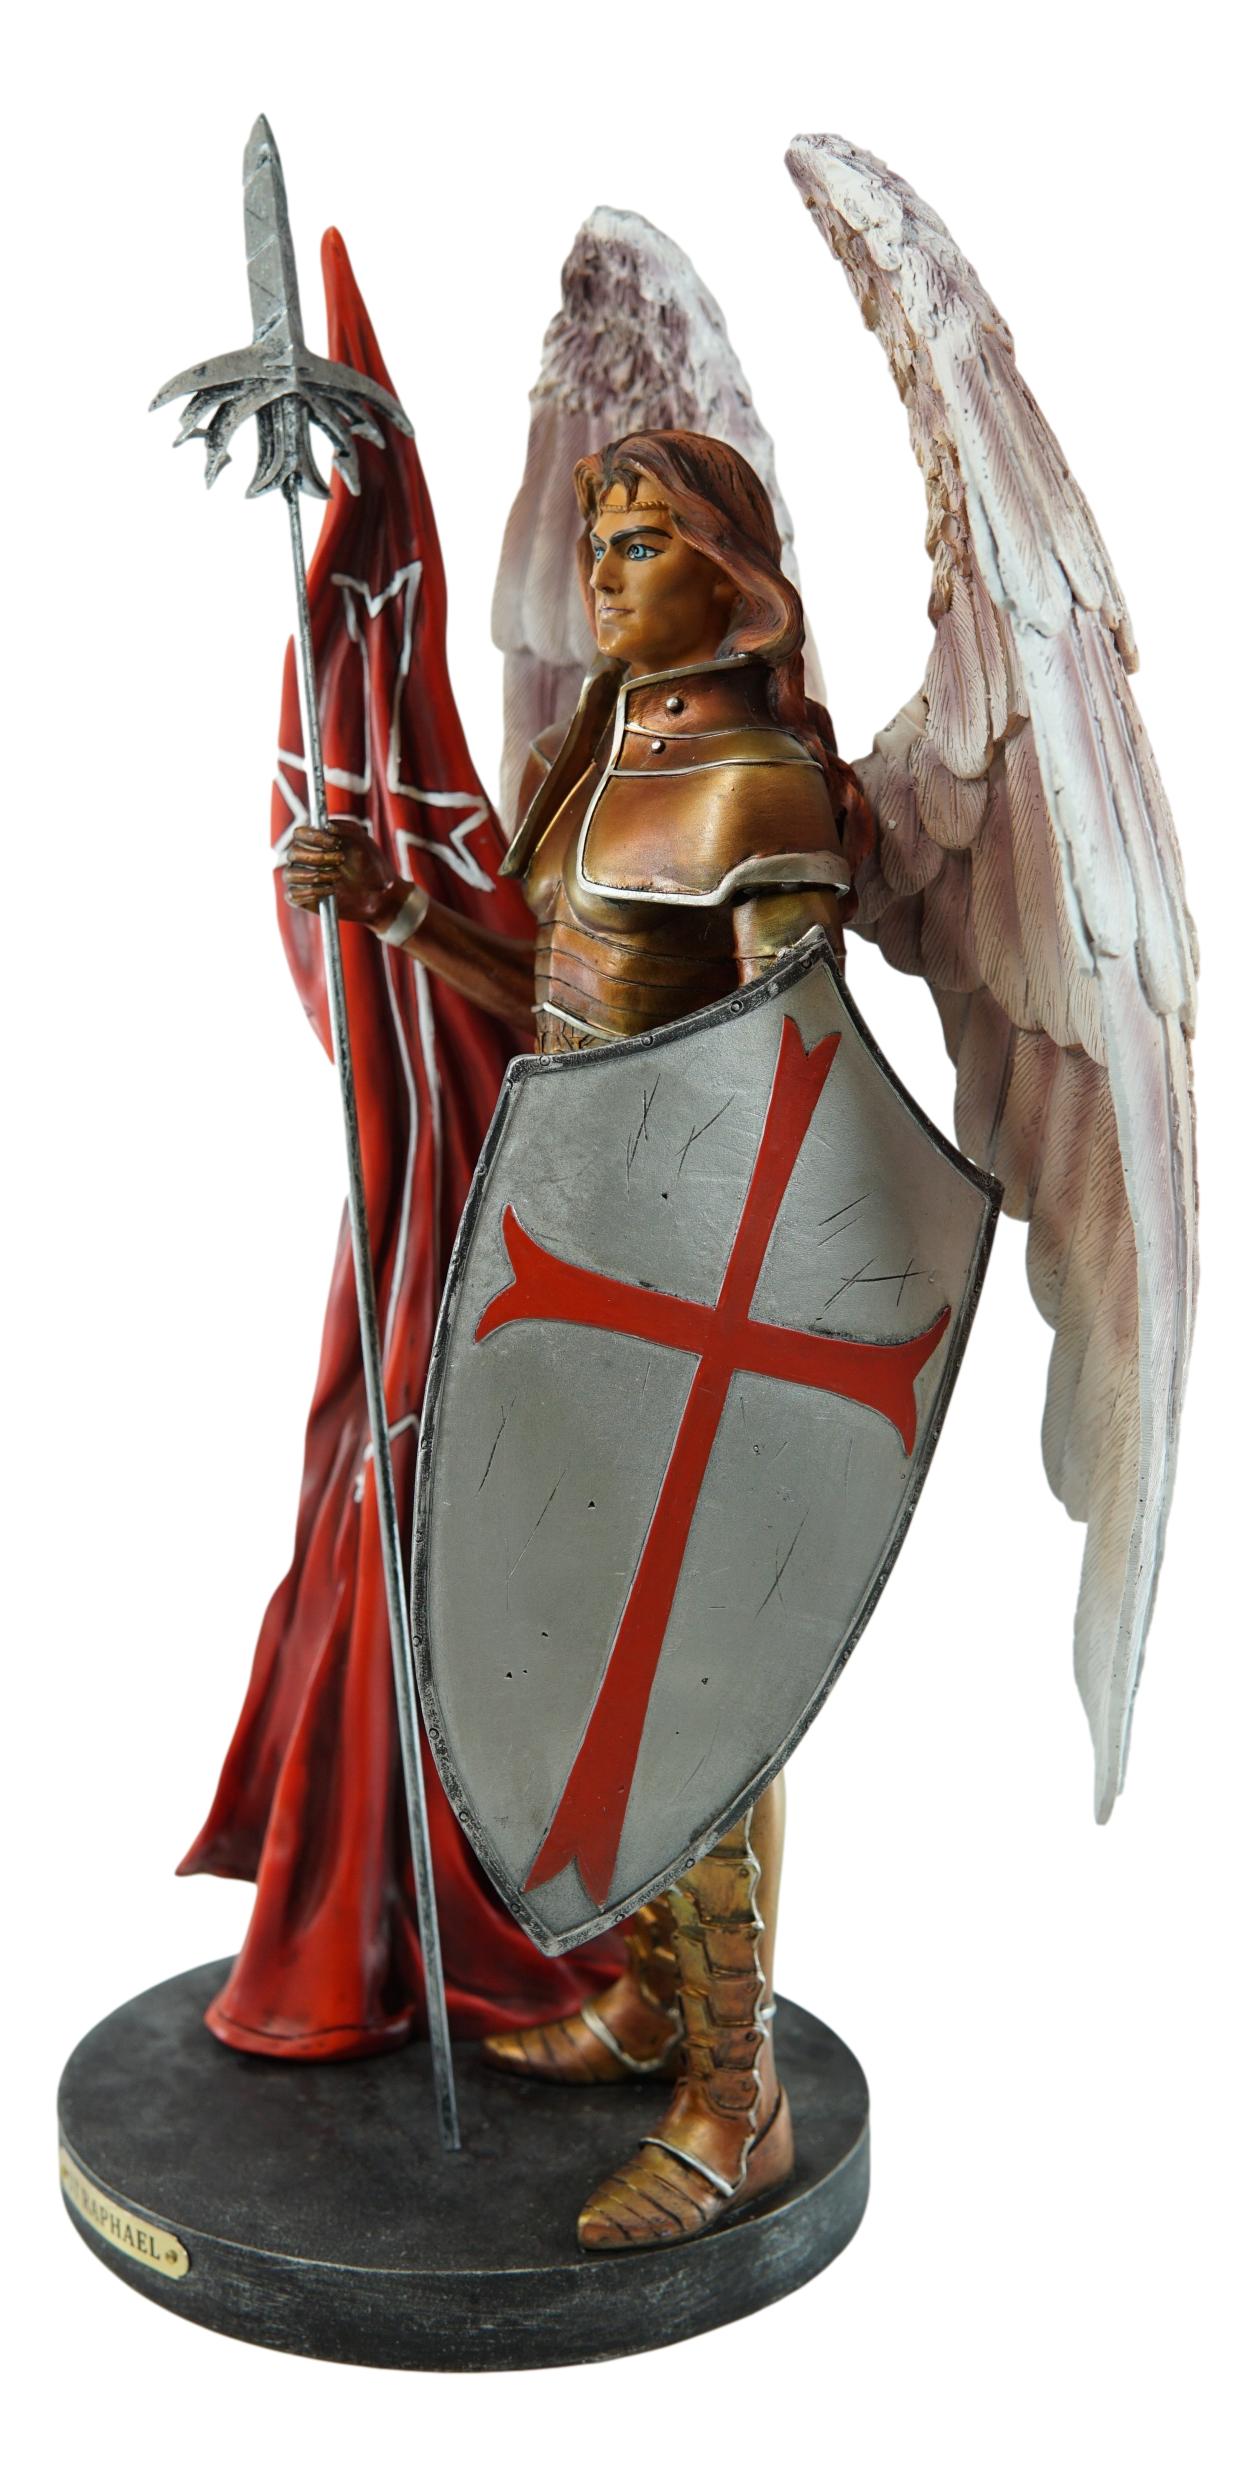 Ebros Large Archangel Saint Raphael With Spear And Faith Shield Statue - image 3 of 7